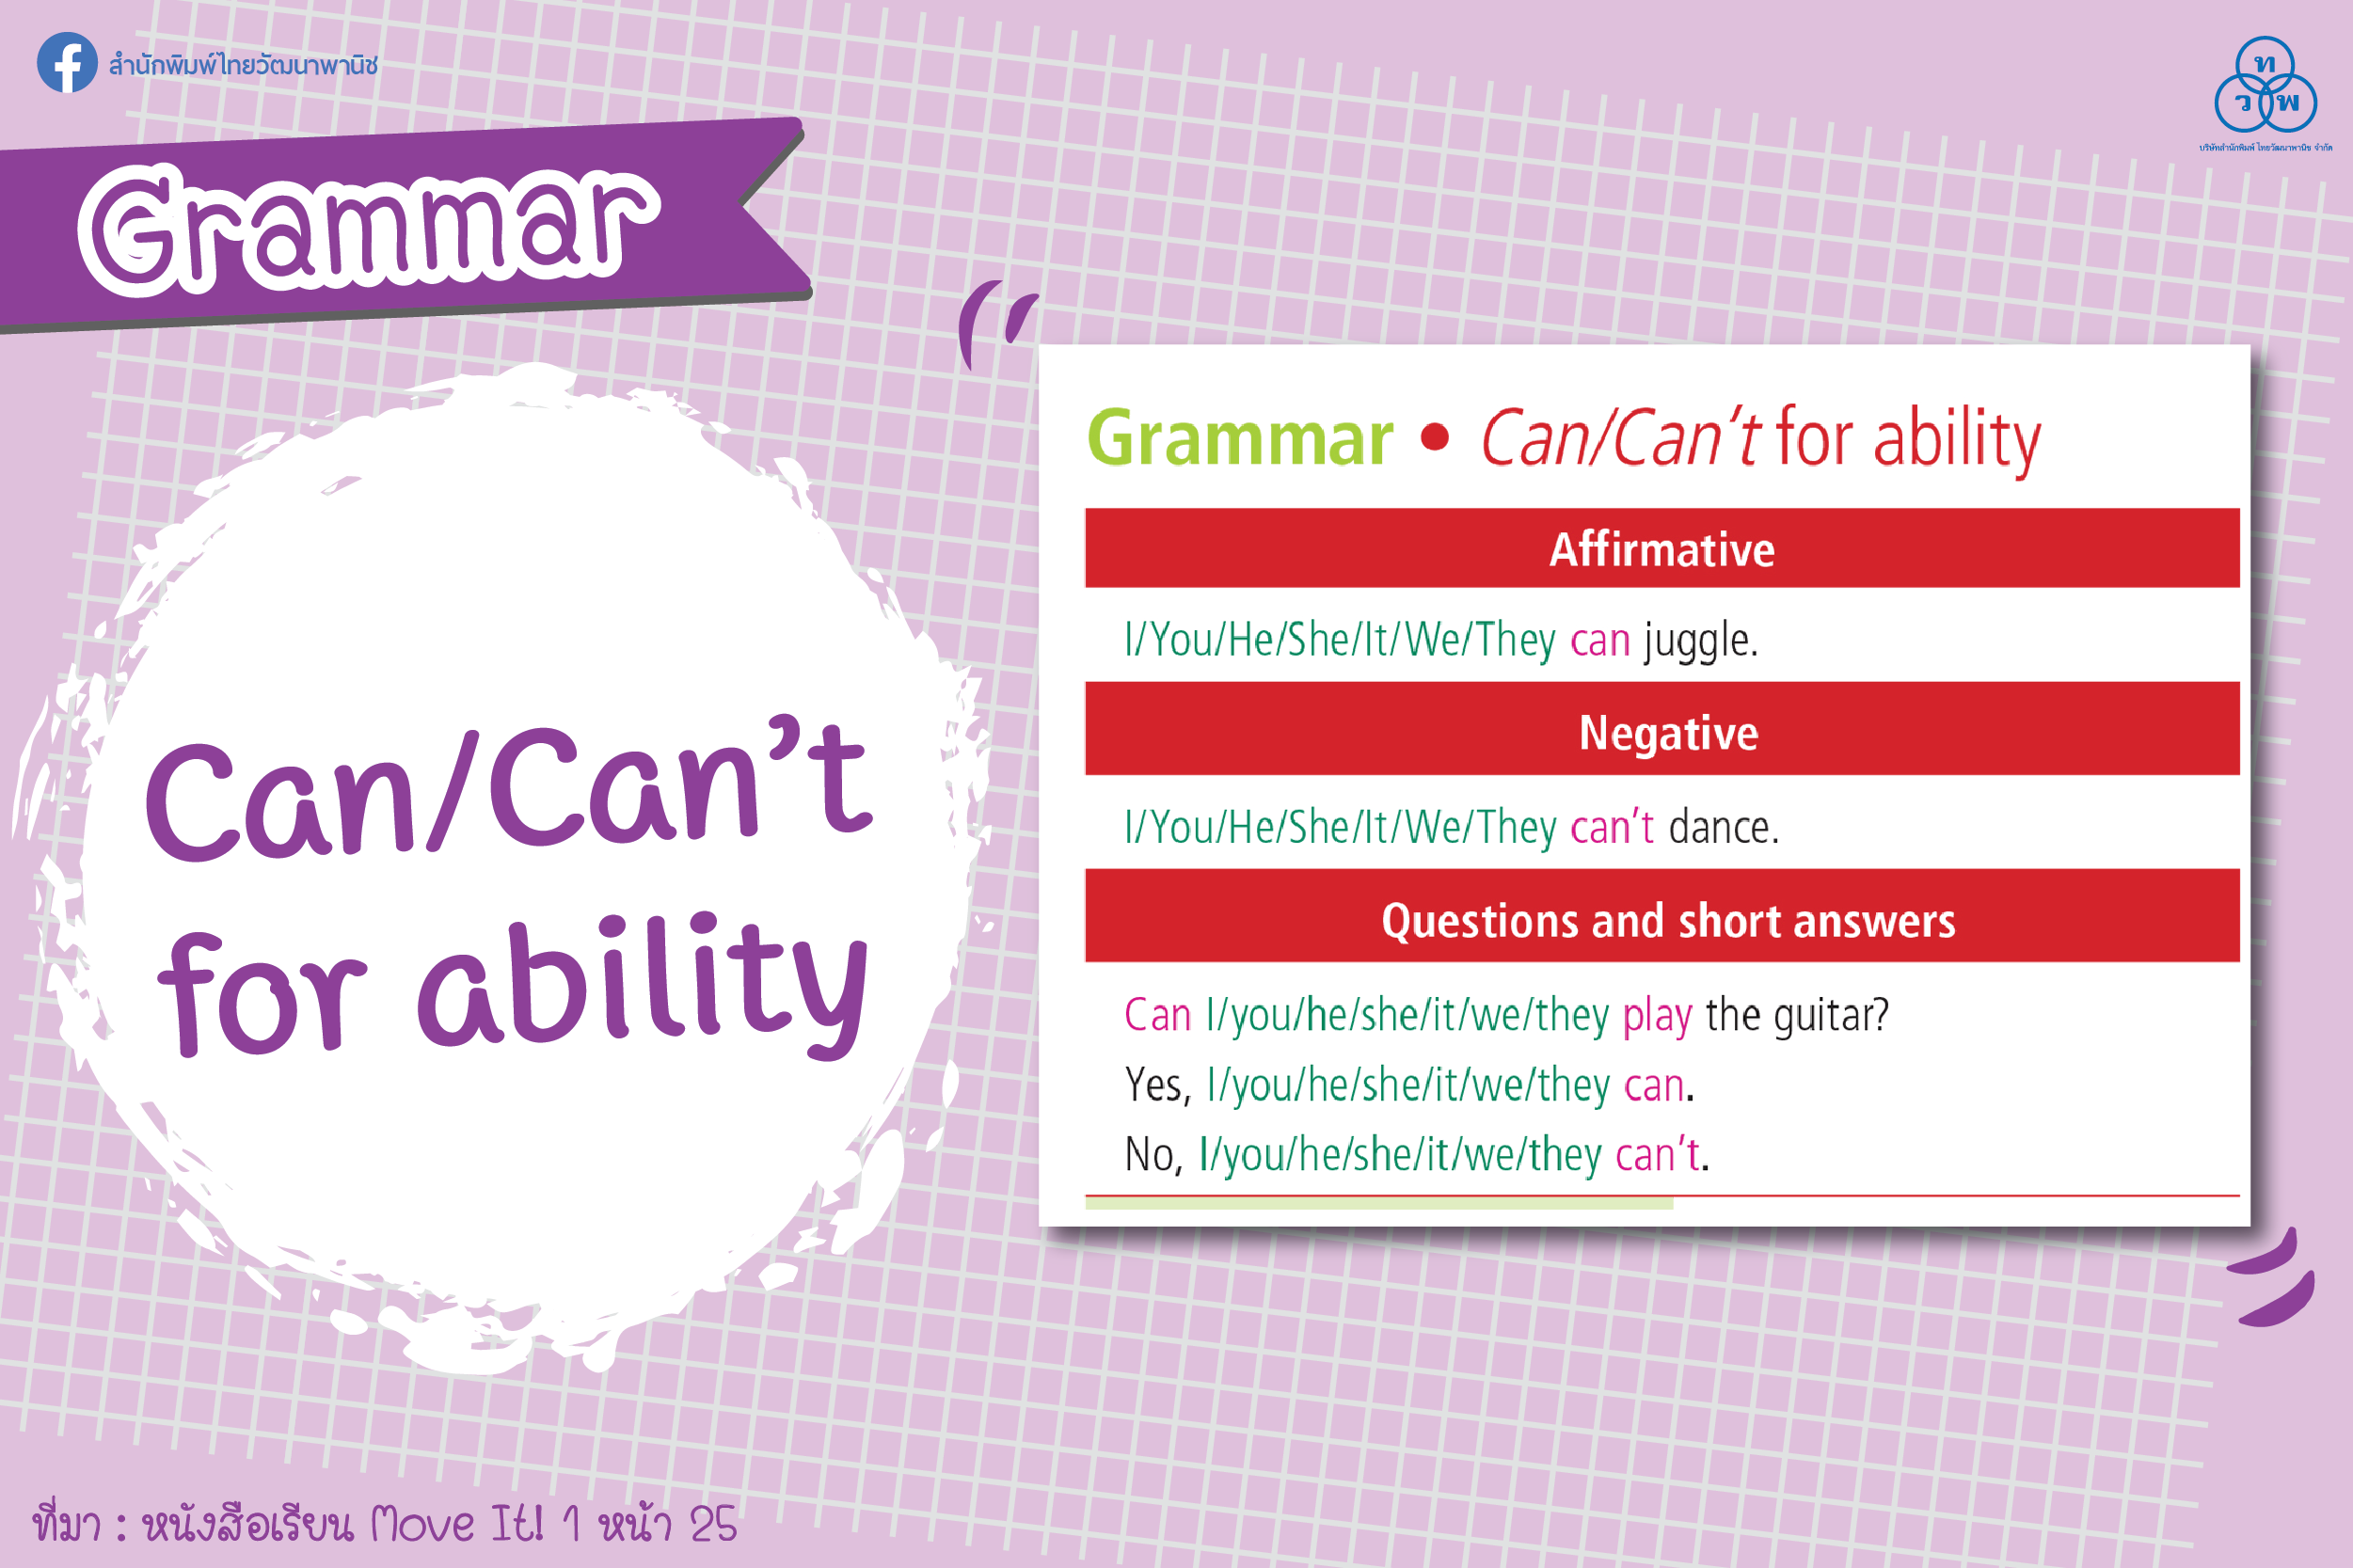 Grammar: Can/Can’t for ability